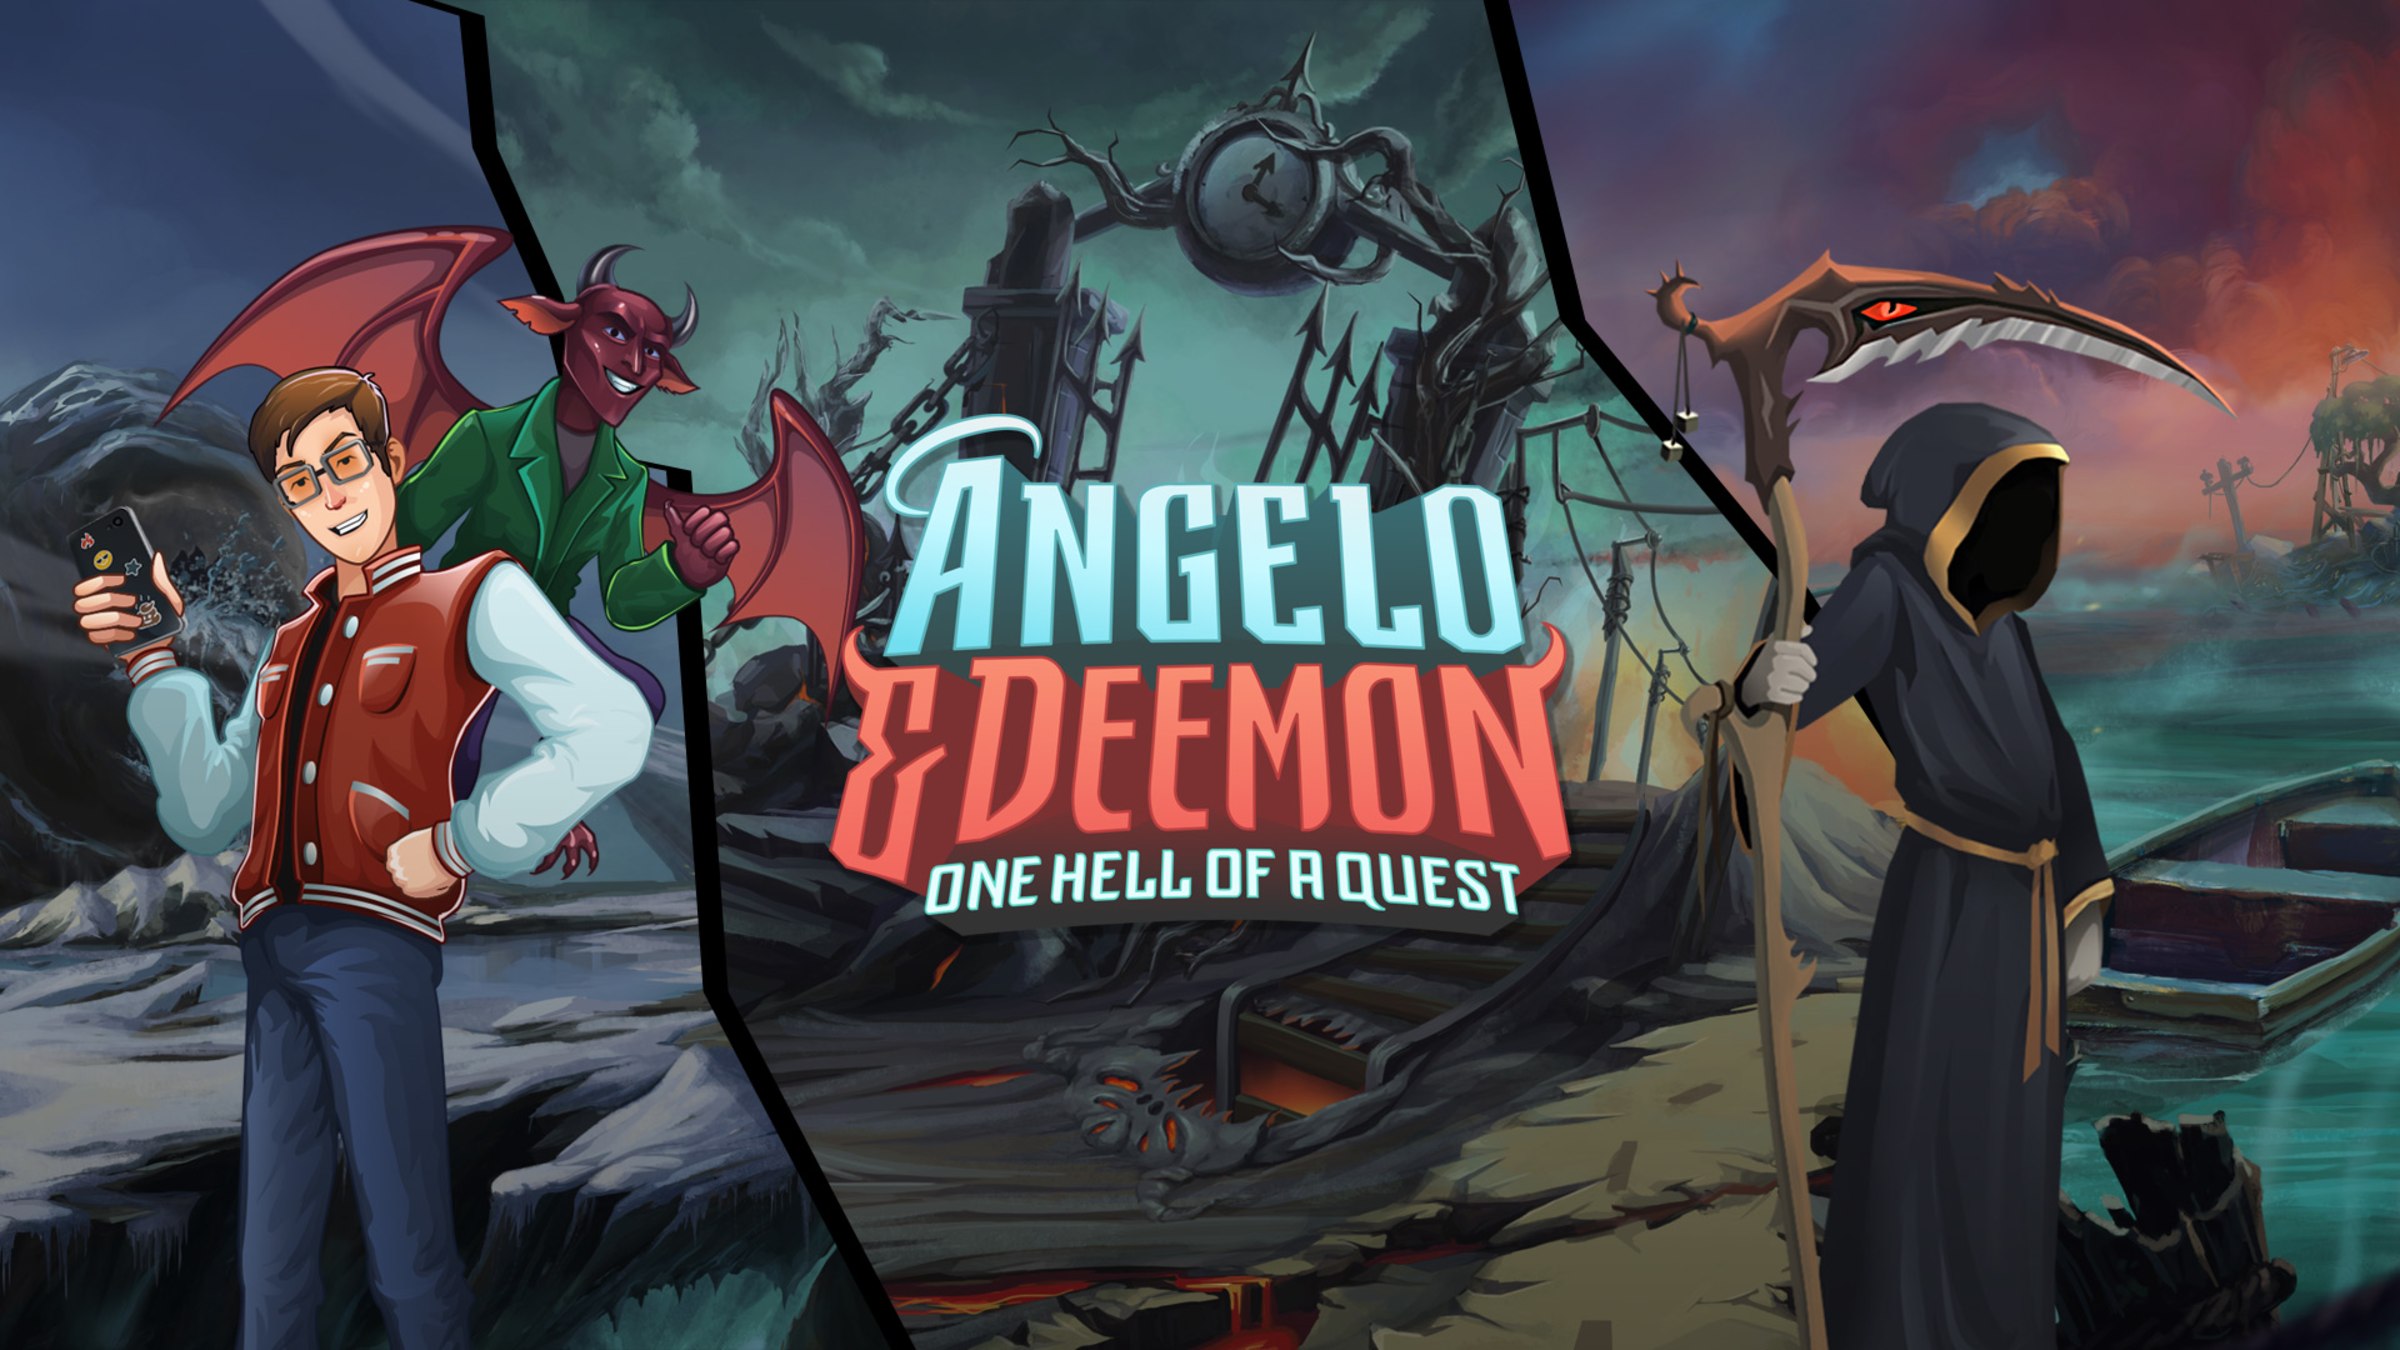 angelo-and-deemon-one-hell-of-a-quest-pour-nintendo-switch-site-officiel-nintendo